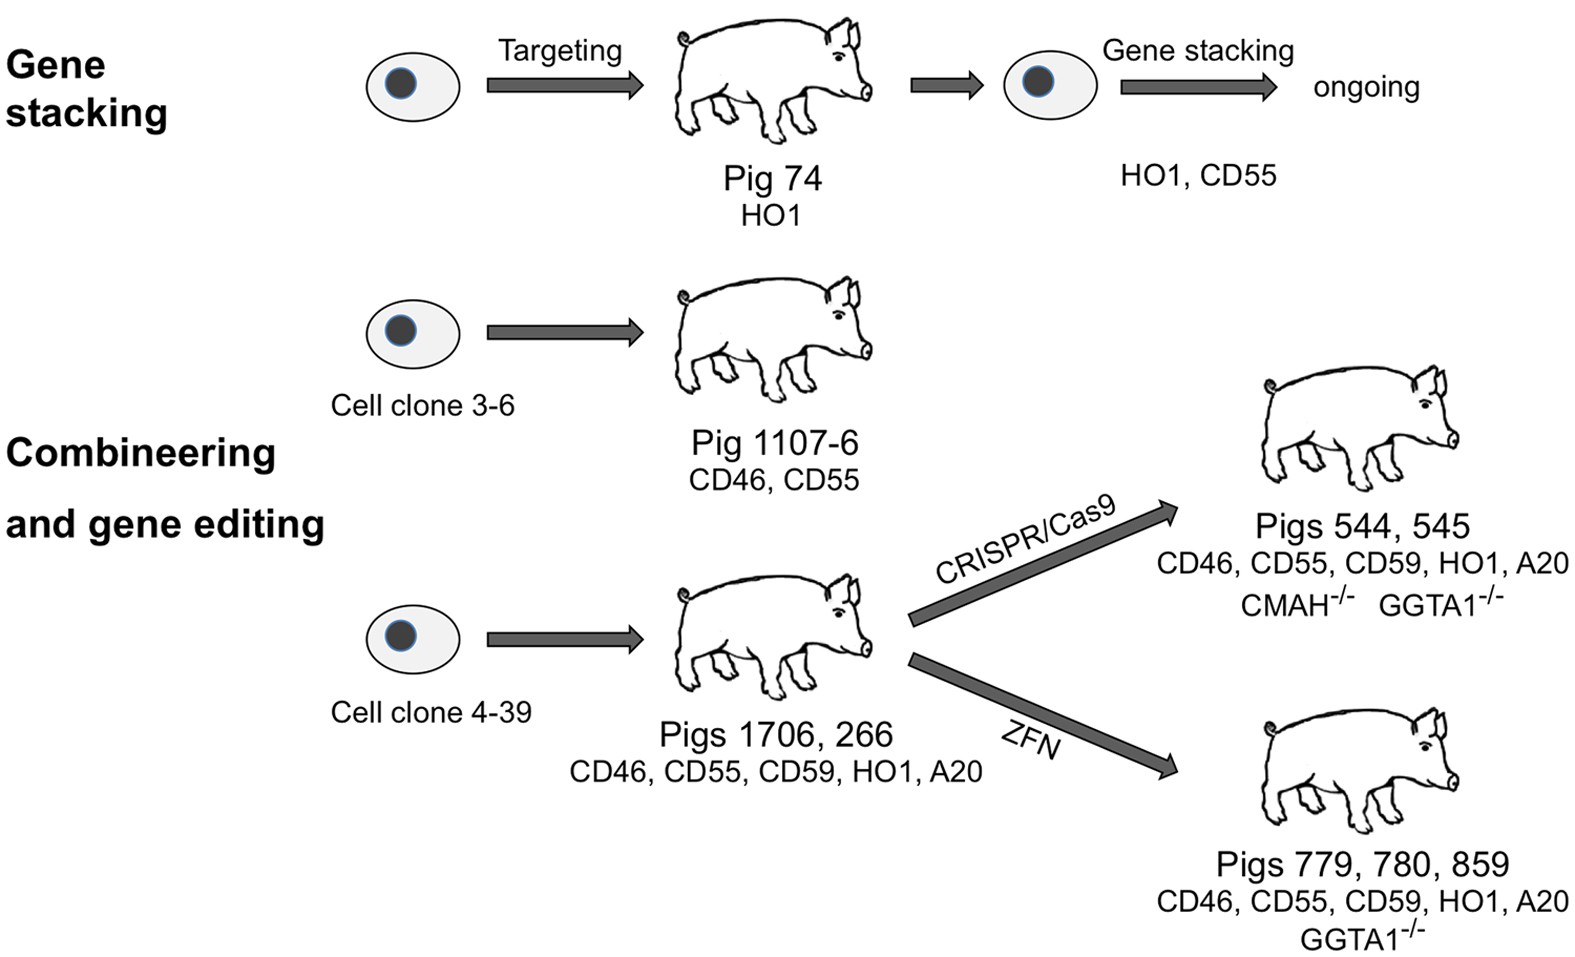 Efficient production of multi-modified pigs for xenotransplantation by  'combineering', gene stacking and gene editing | Scientific Reports